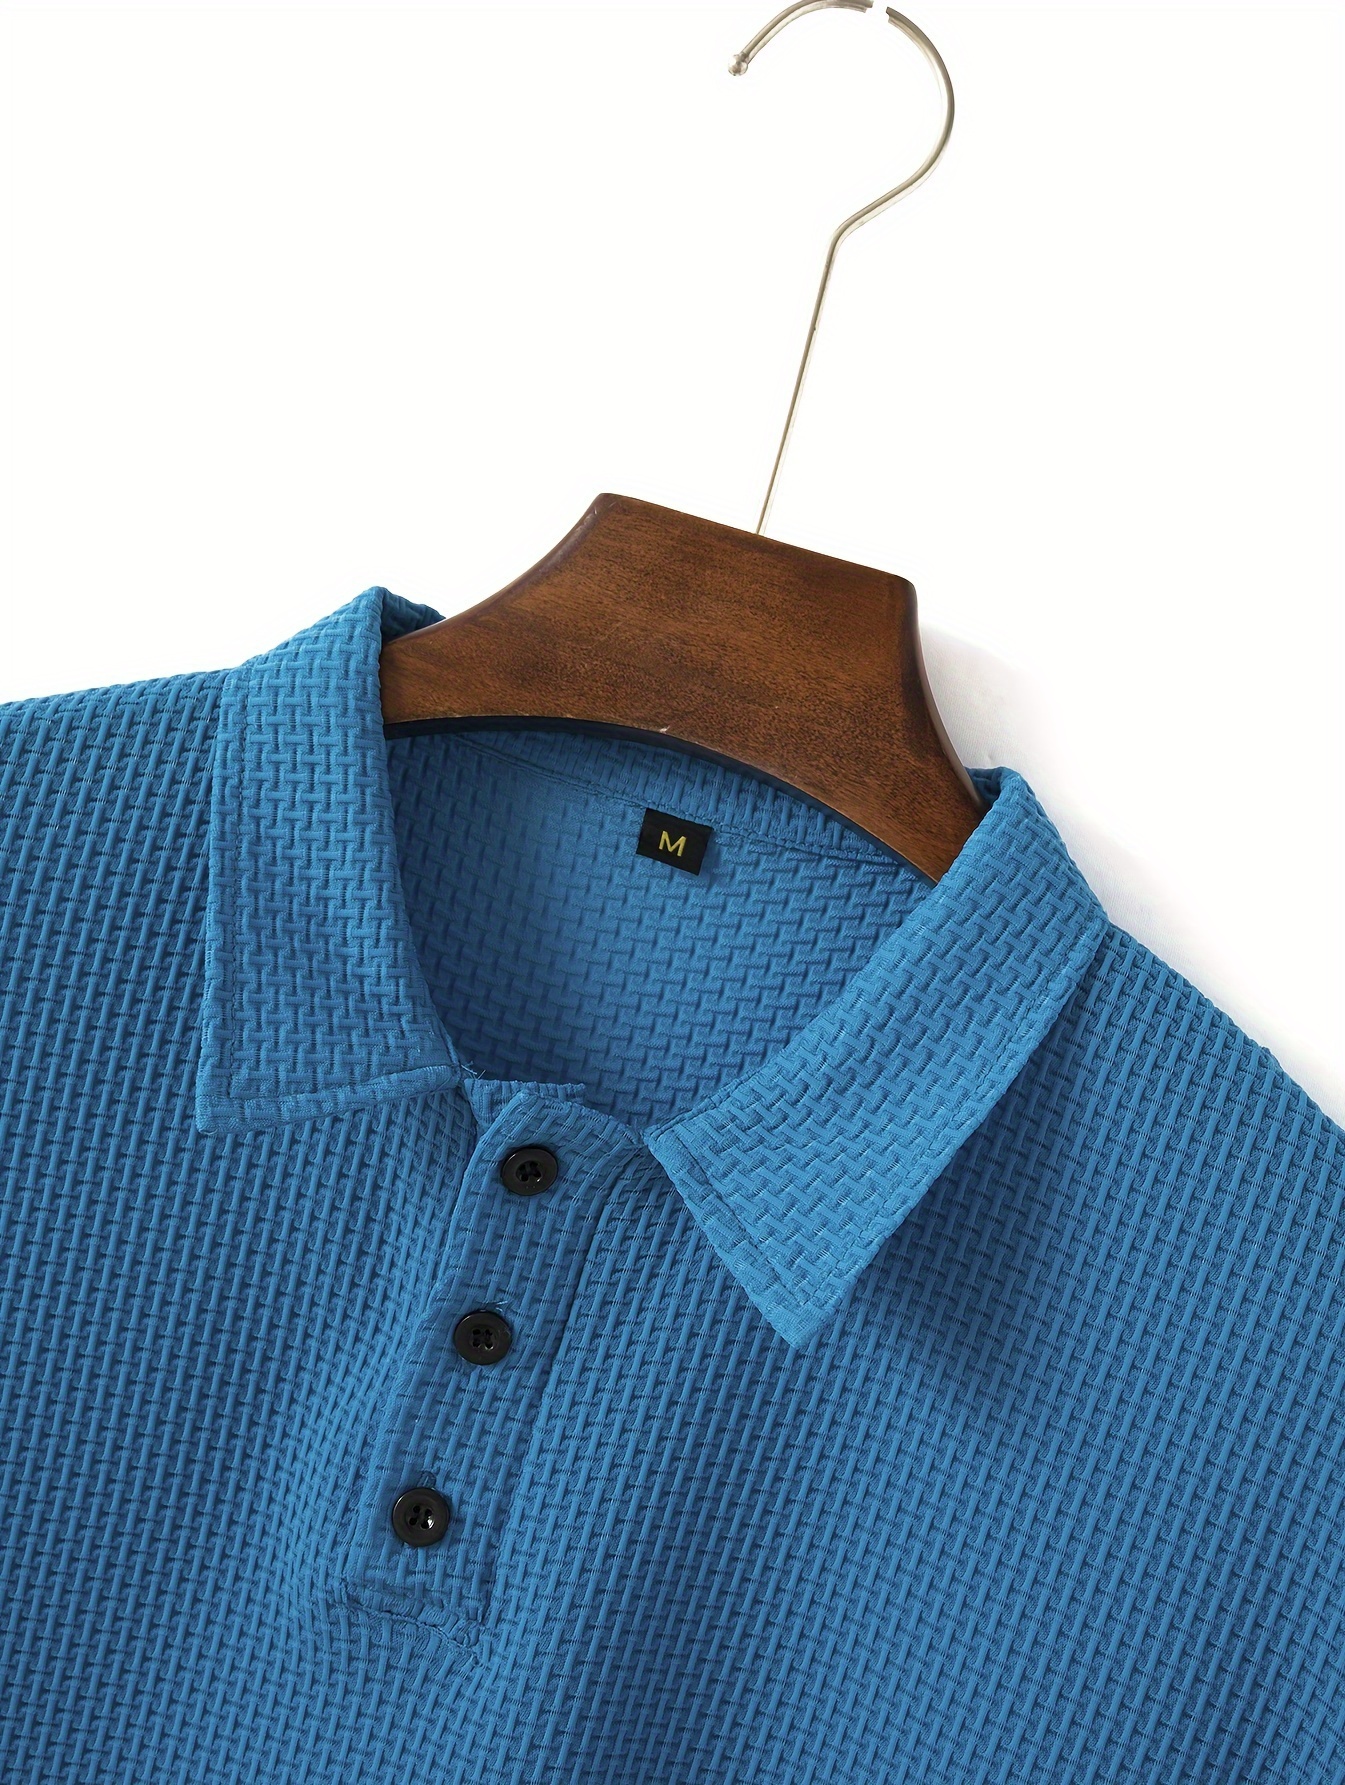 Men Solid Ribbed Knit Polo Shirt  Polo outfit men, Polo shirt outfits,  Mens tshirts